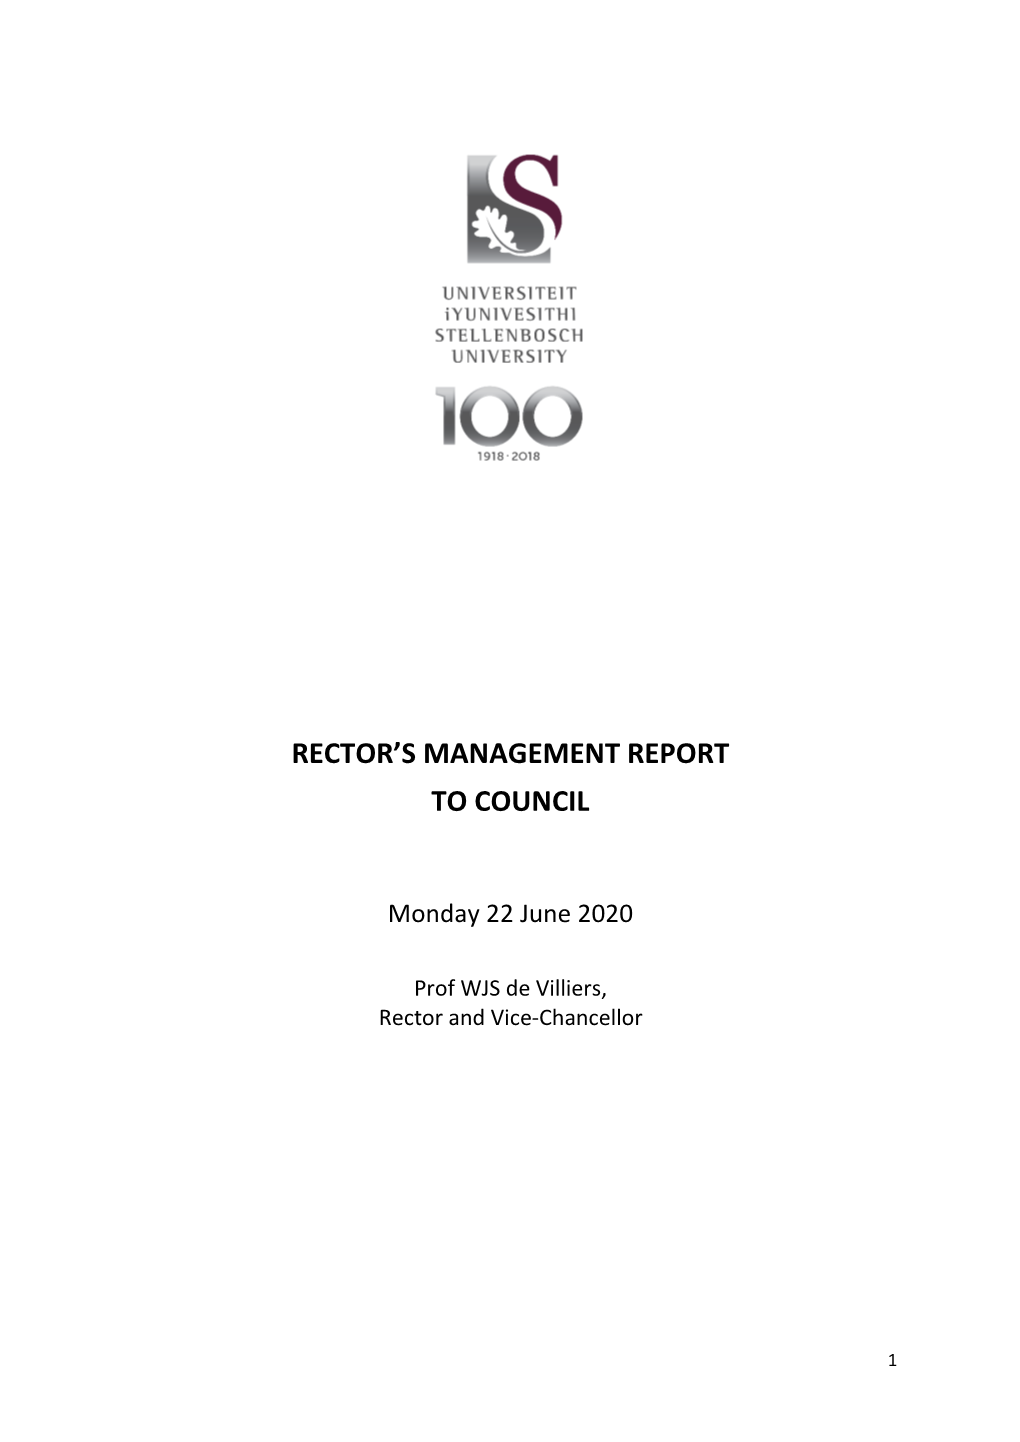 Rector's Management Report to Council